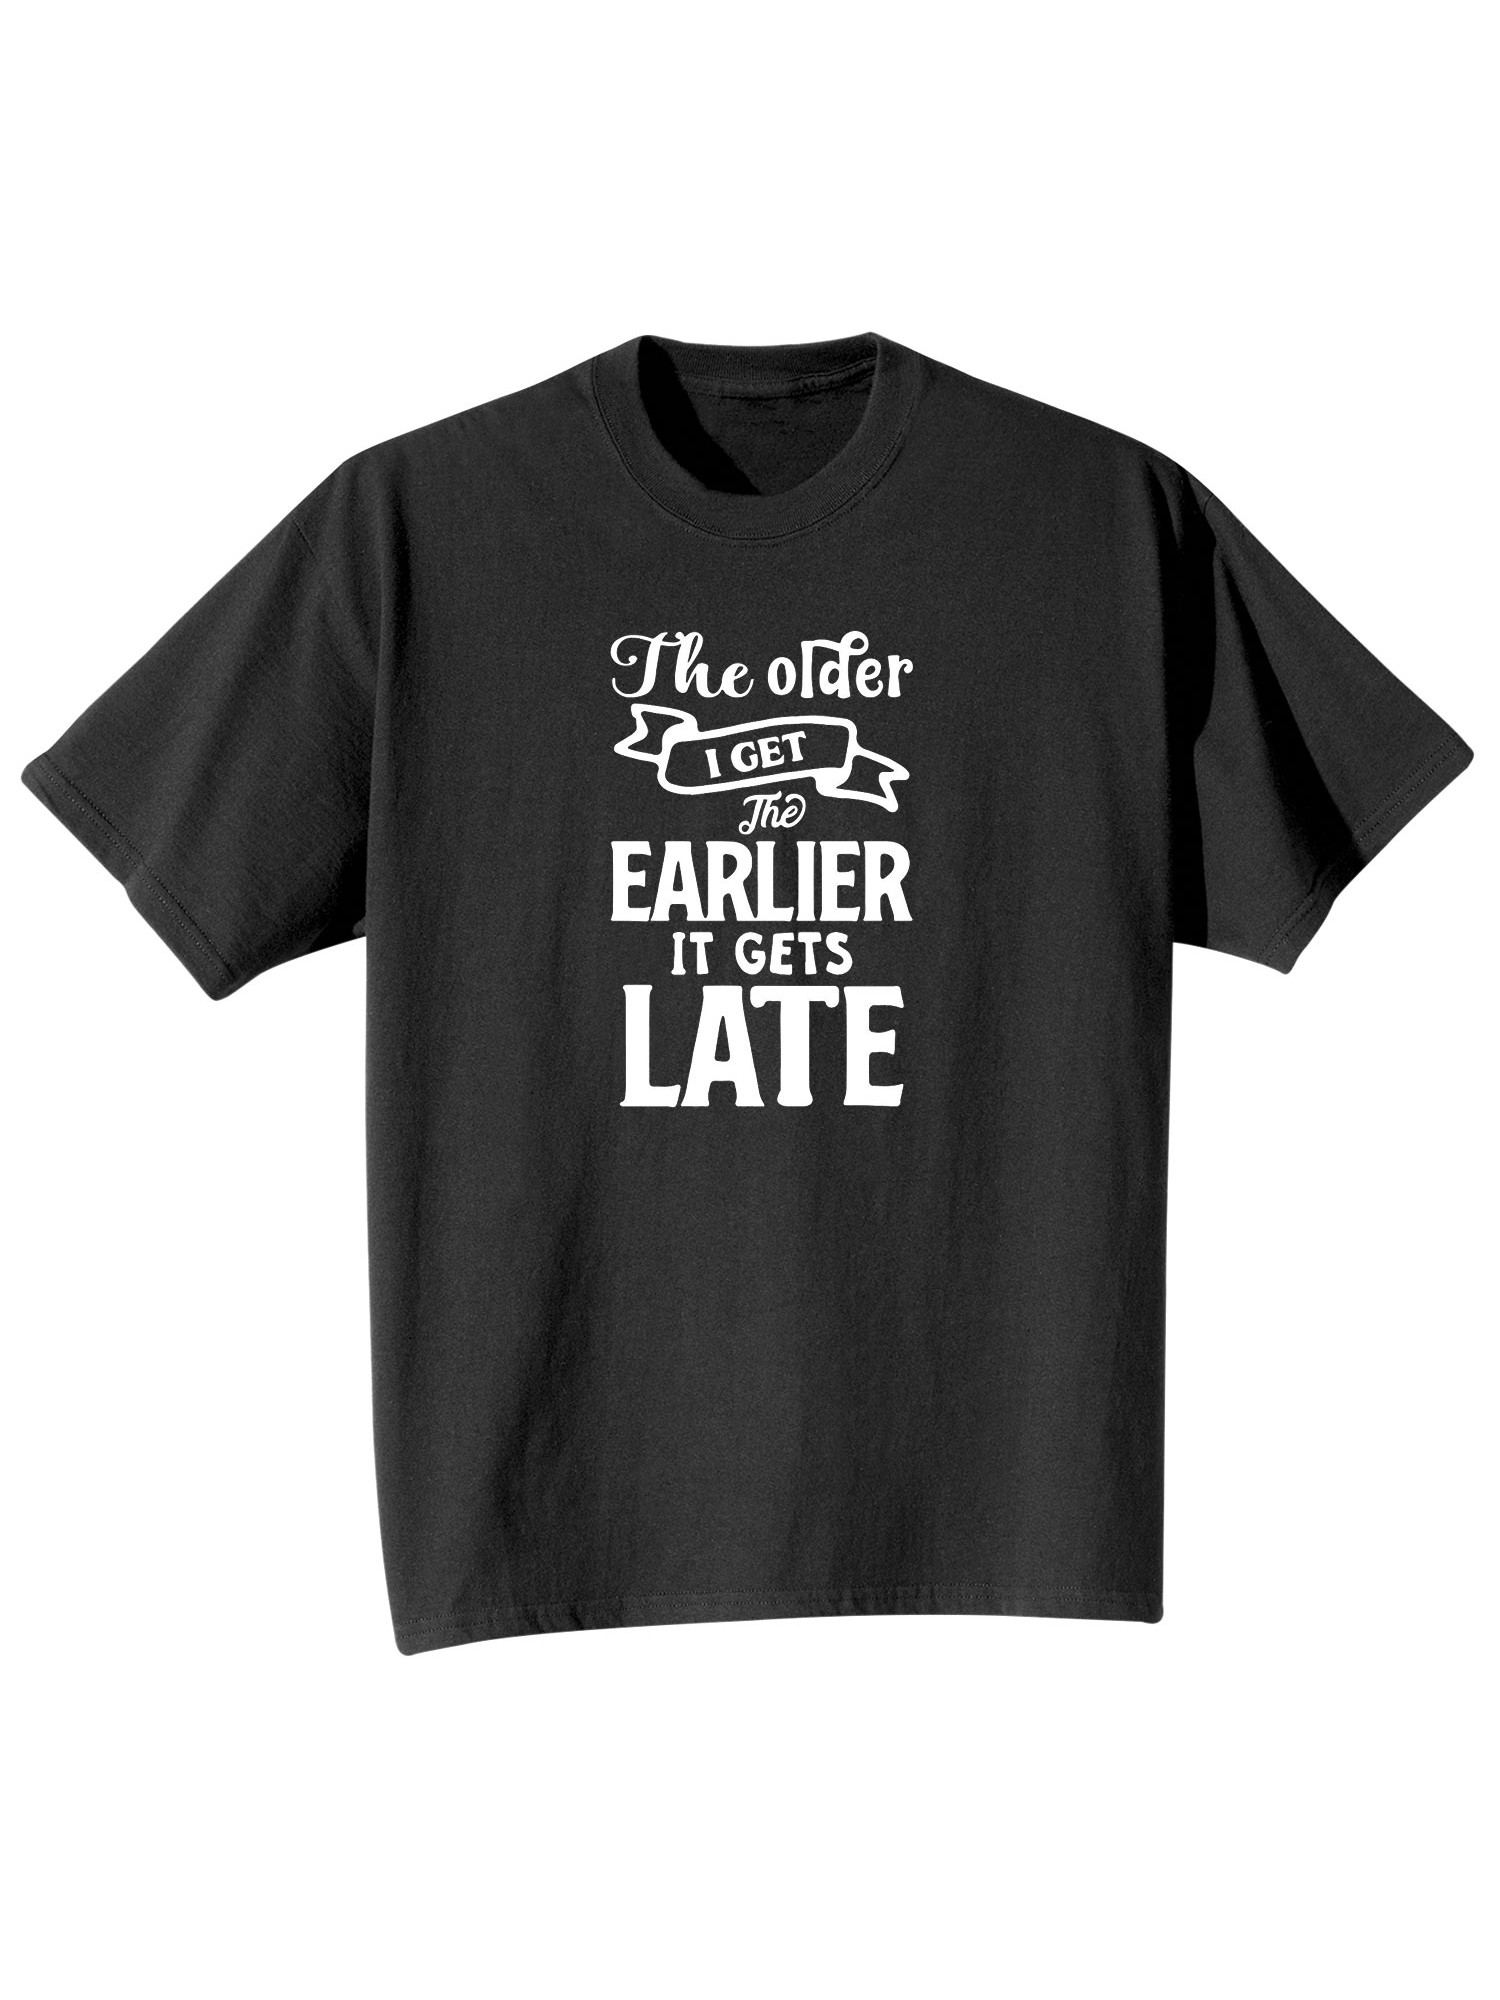 The Older I Get, The Earlier It Gets Late T-Shirt or Sweatshirt